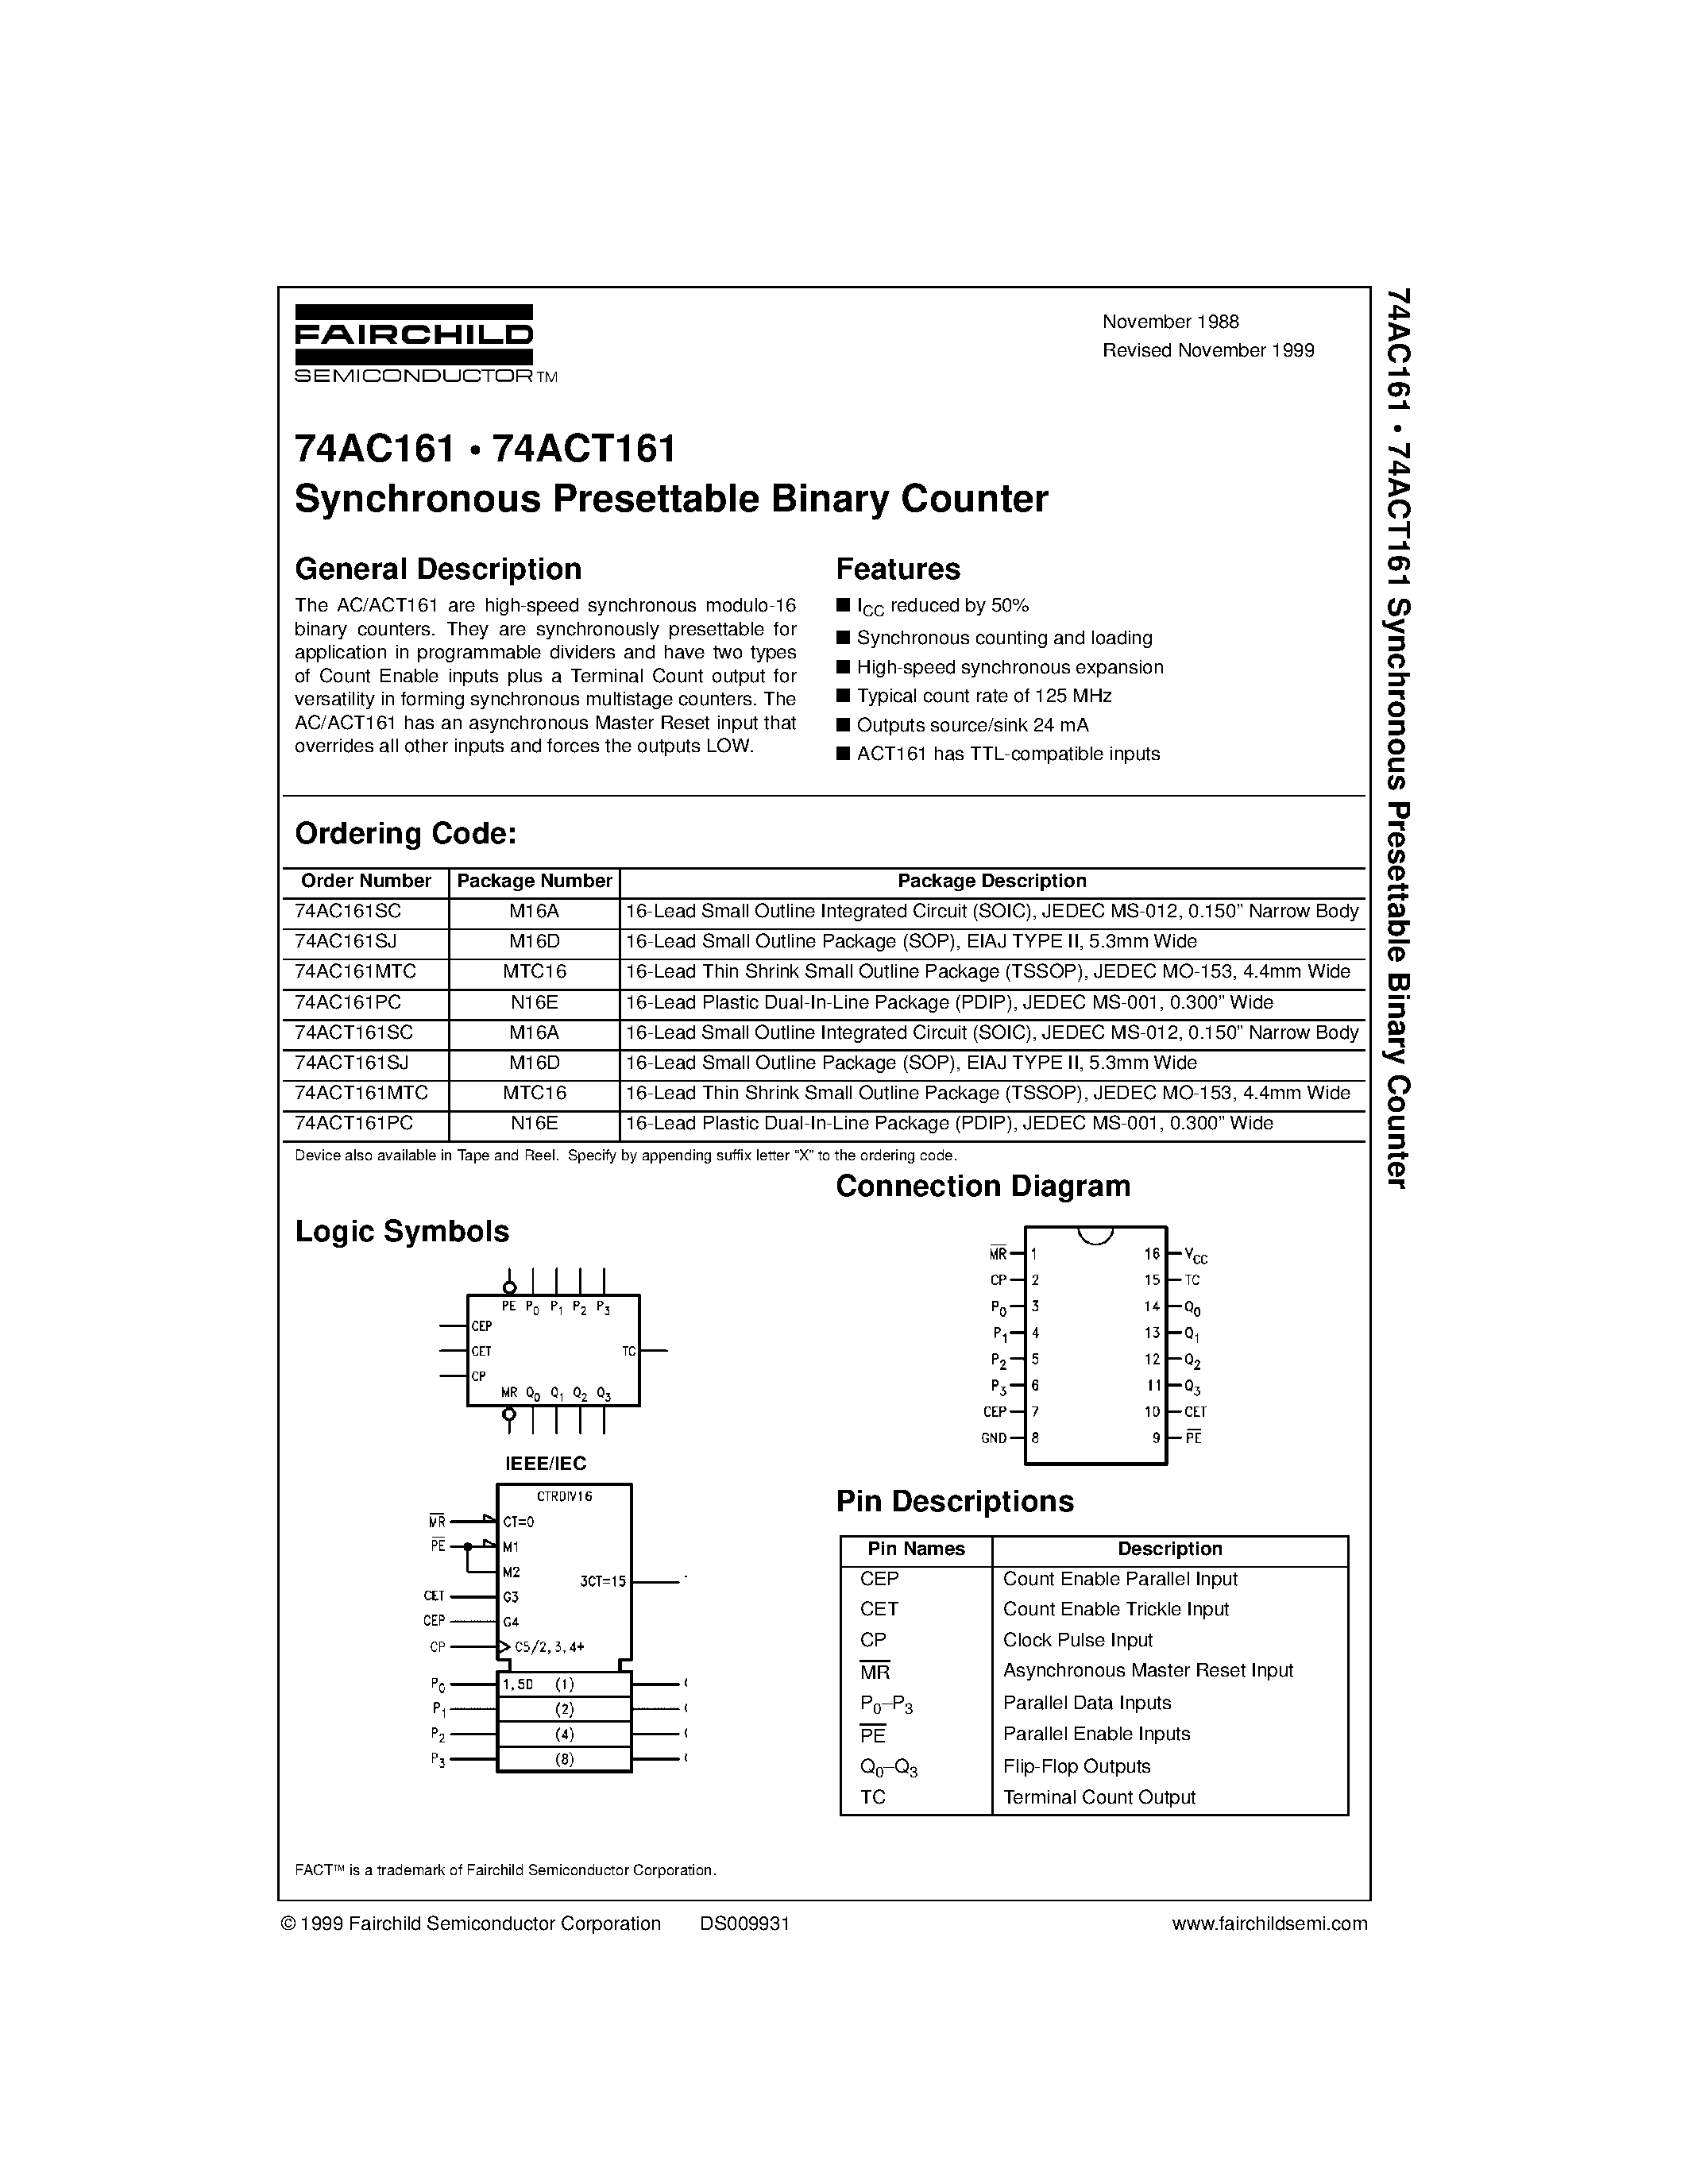 Datasheet 74AC161PC - Synchronous Presettable Binary Counter page 1